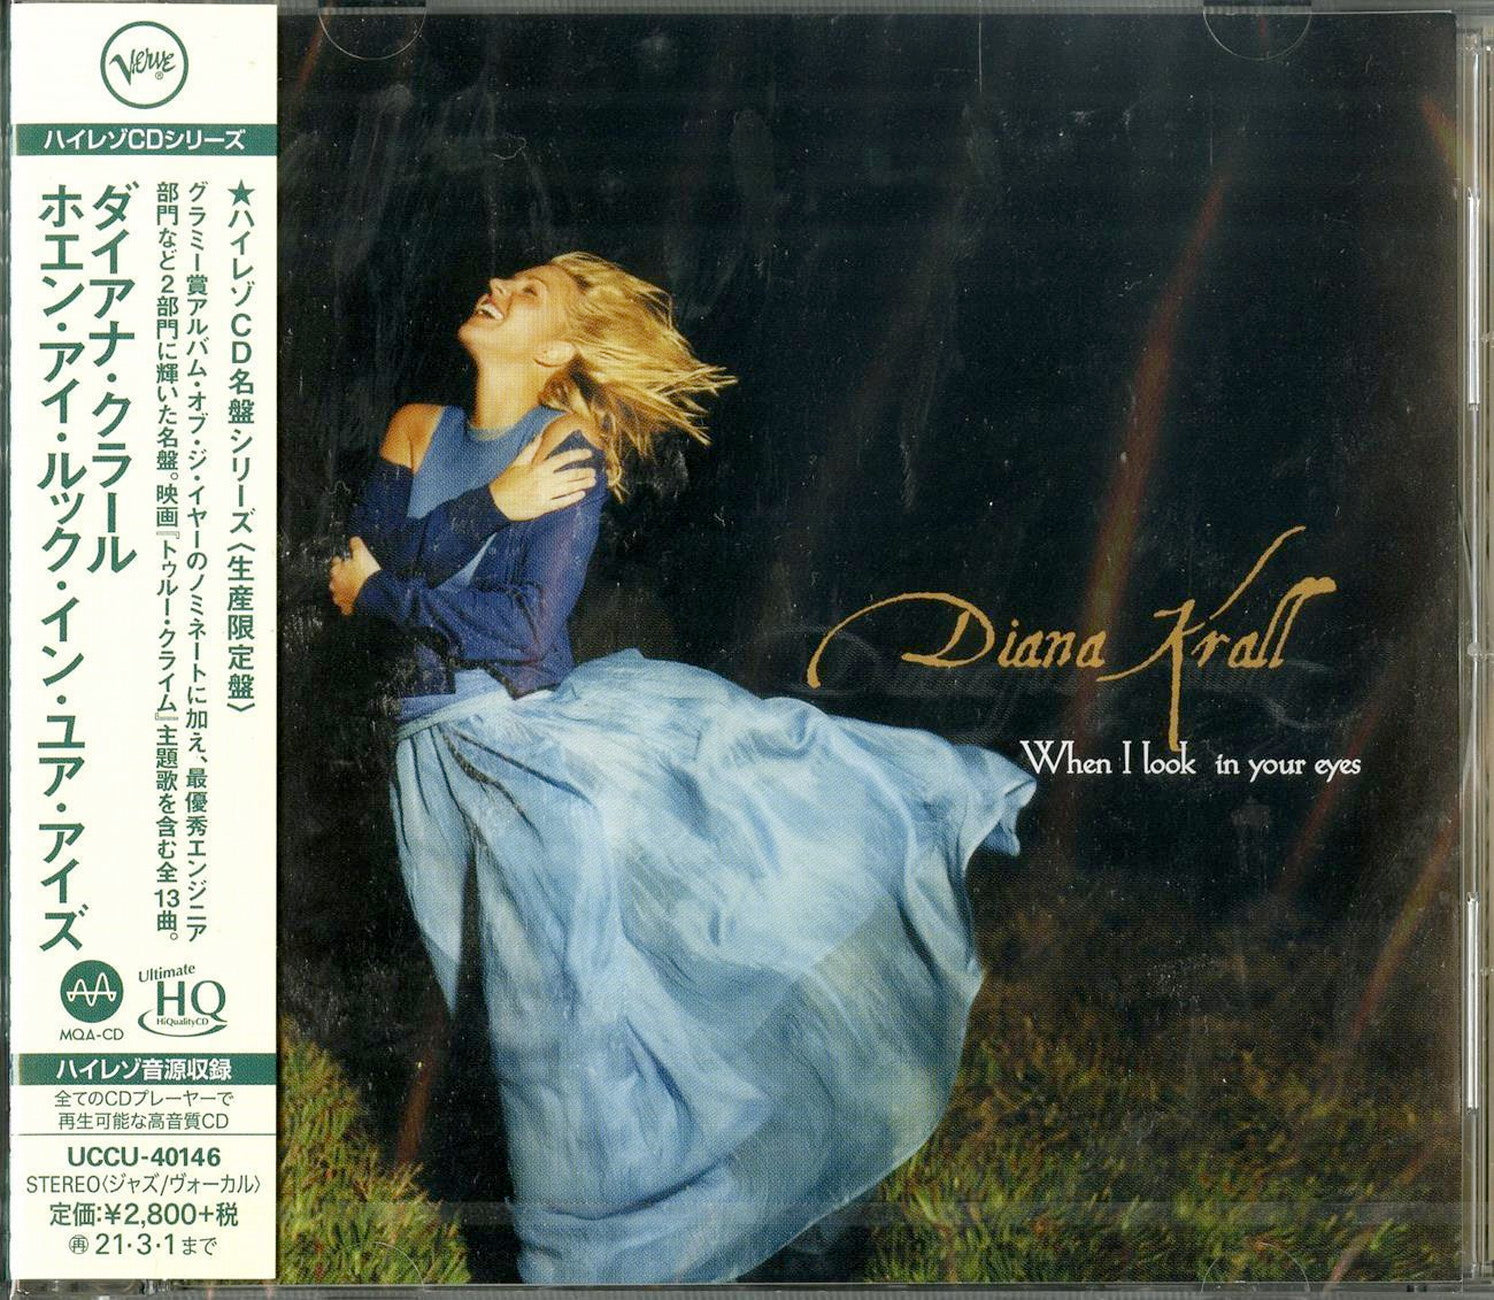 Diana Krall - When I Look In Your Eyes - Japan UHQCD Limited